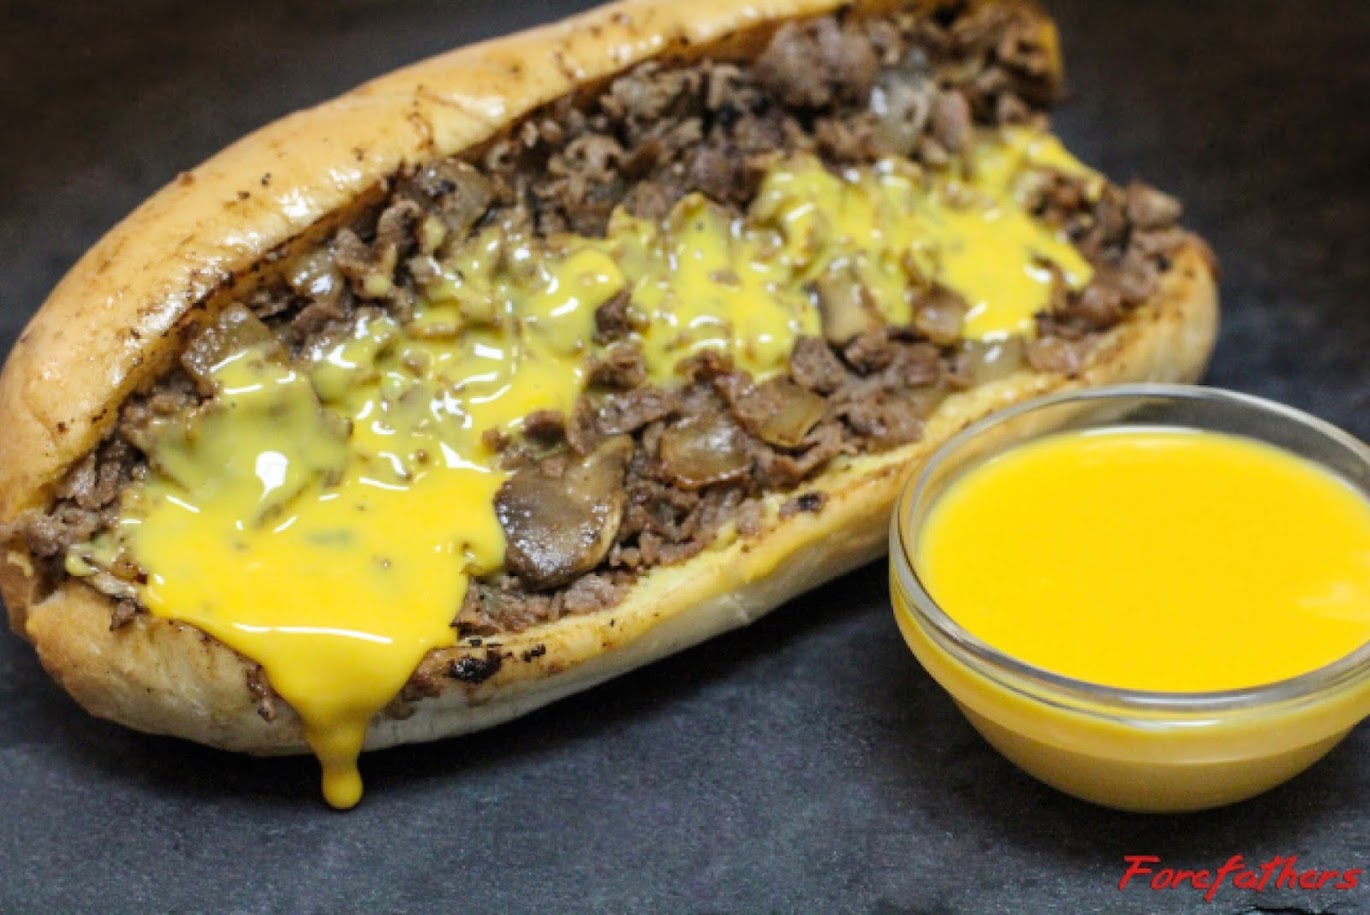 Forefathers Cheesesteaks